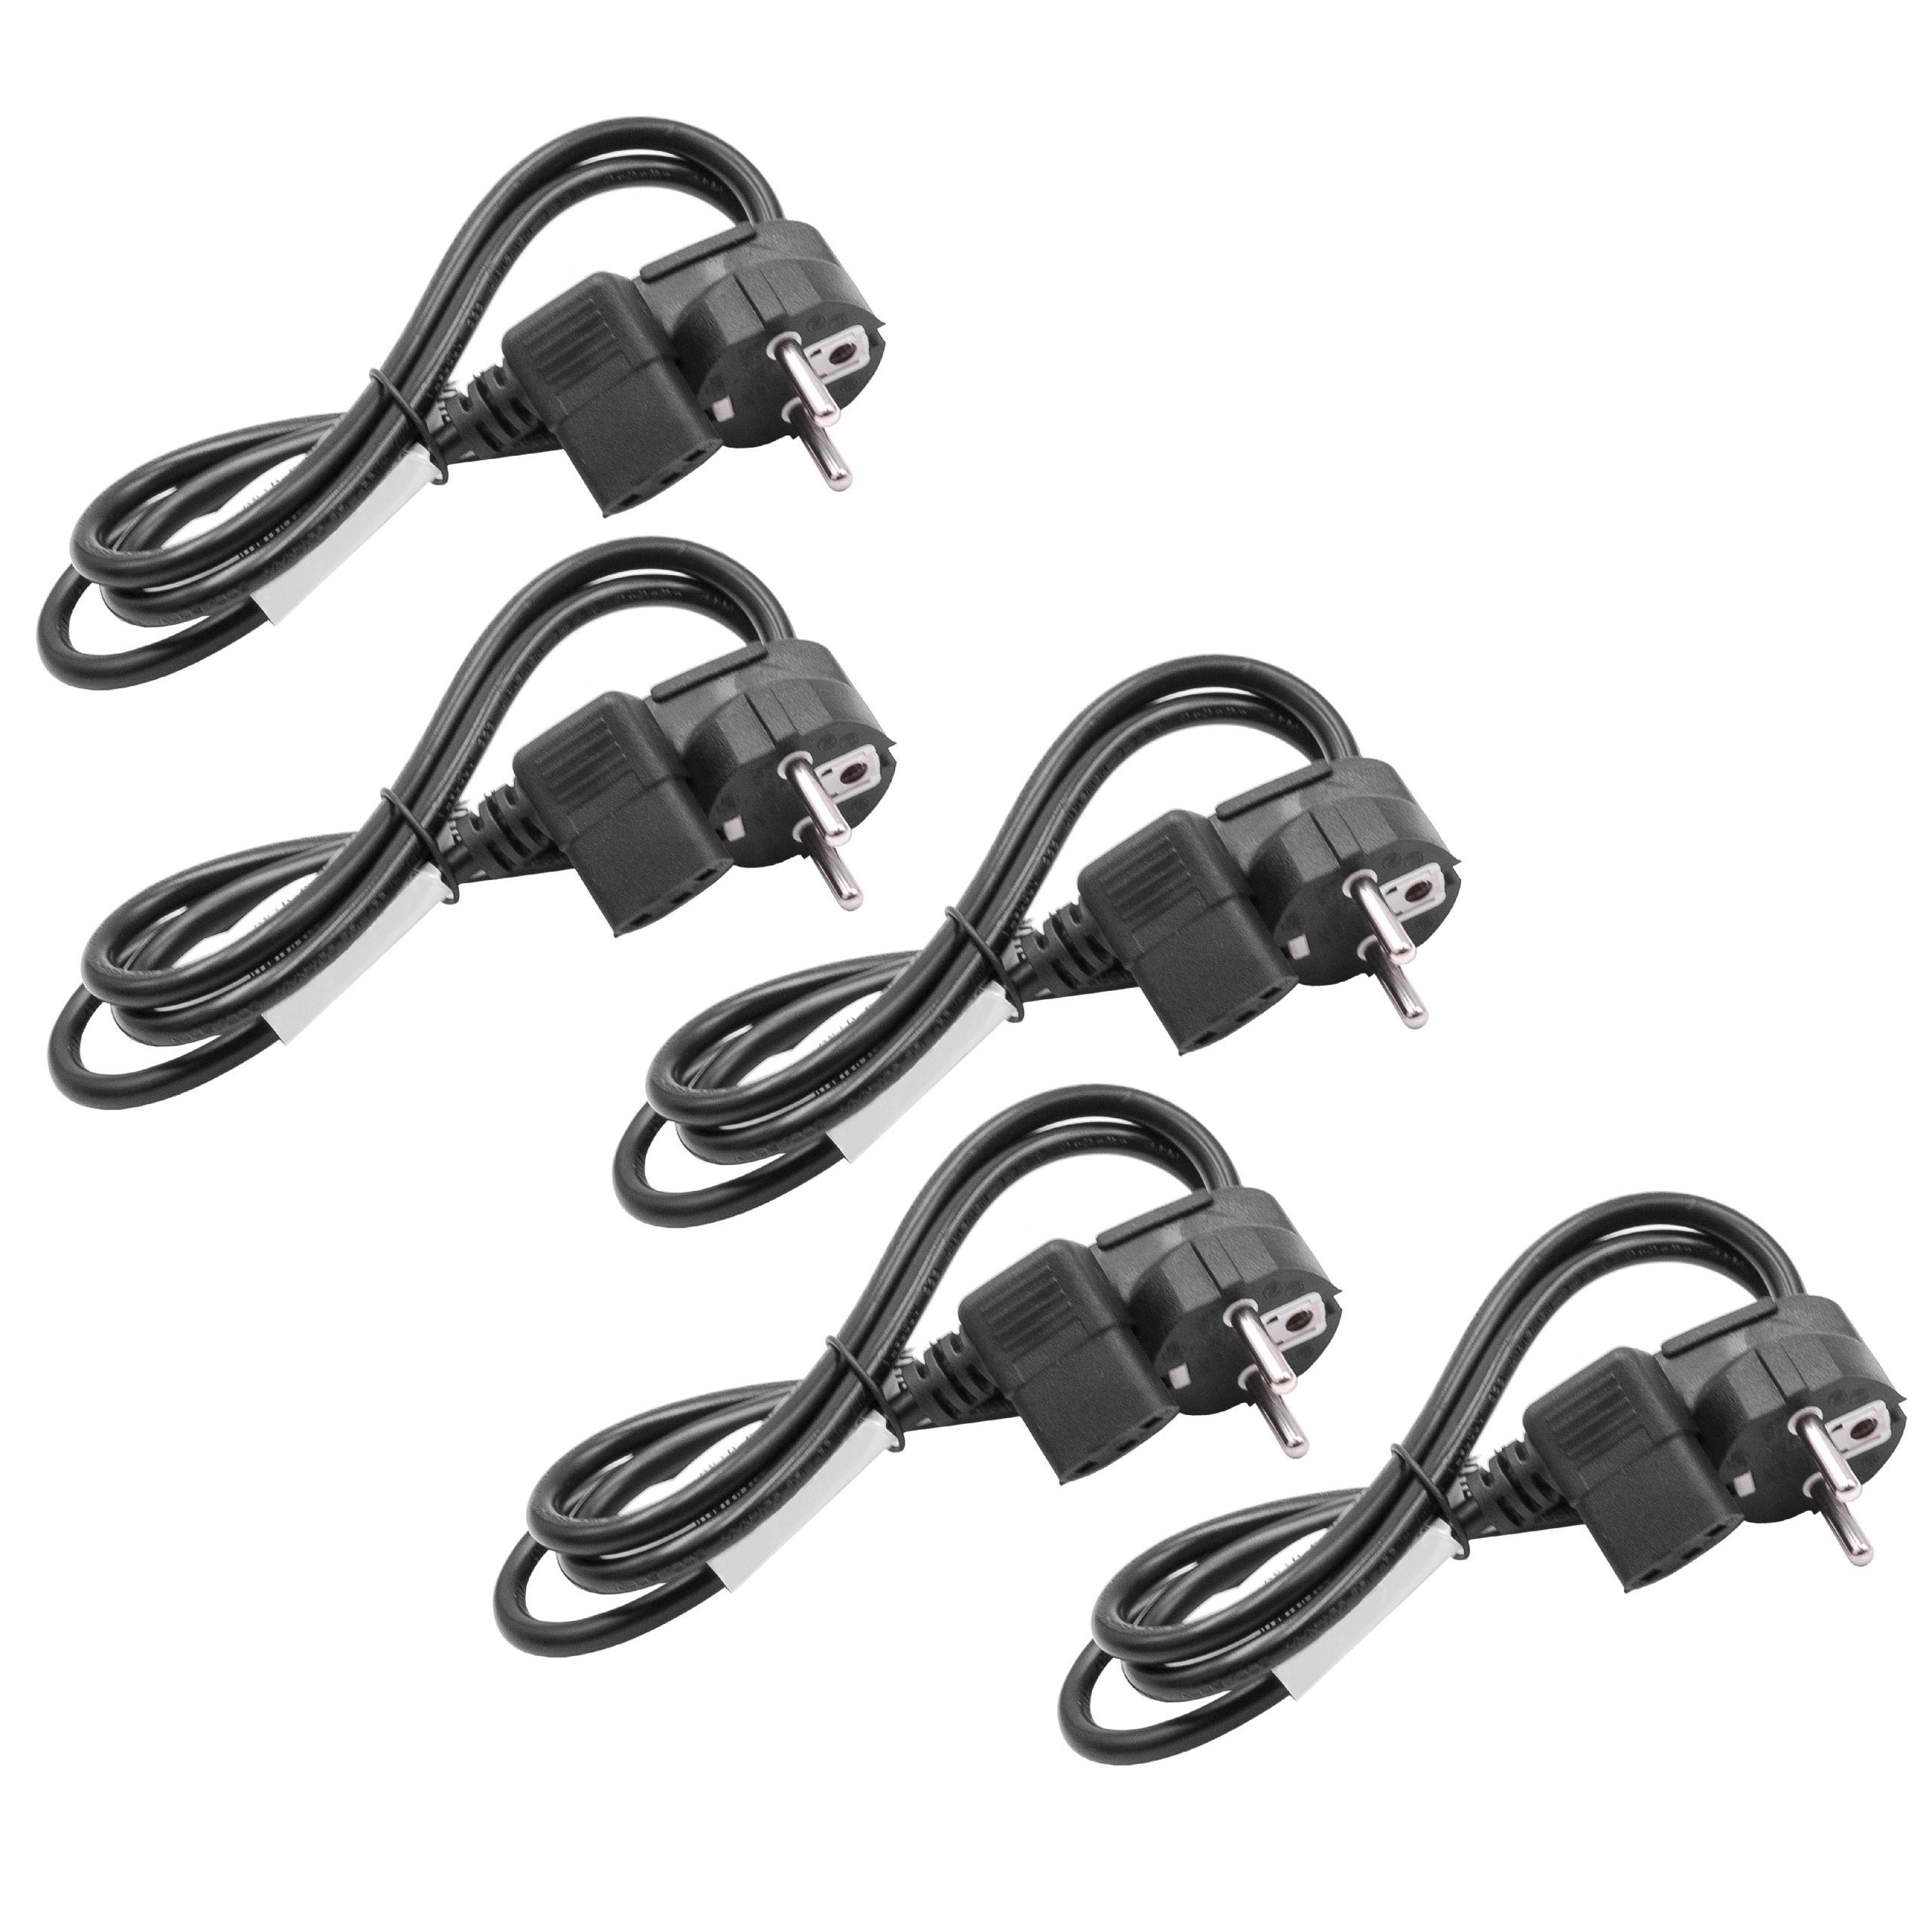 5x C13 Power Cable Euro Plug suitable for Devices - 1 m, Angled